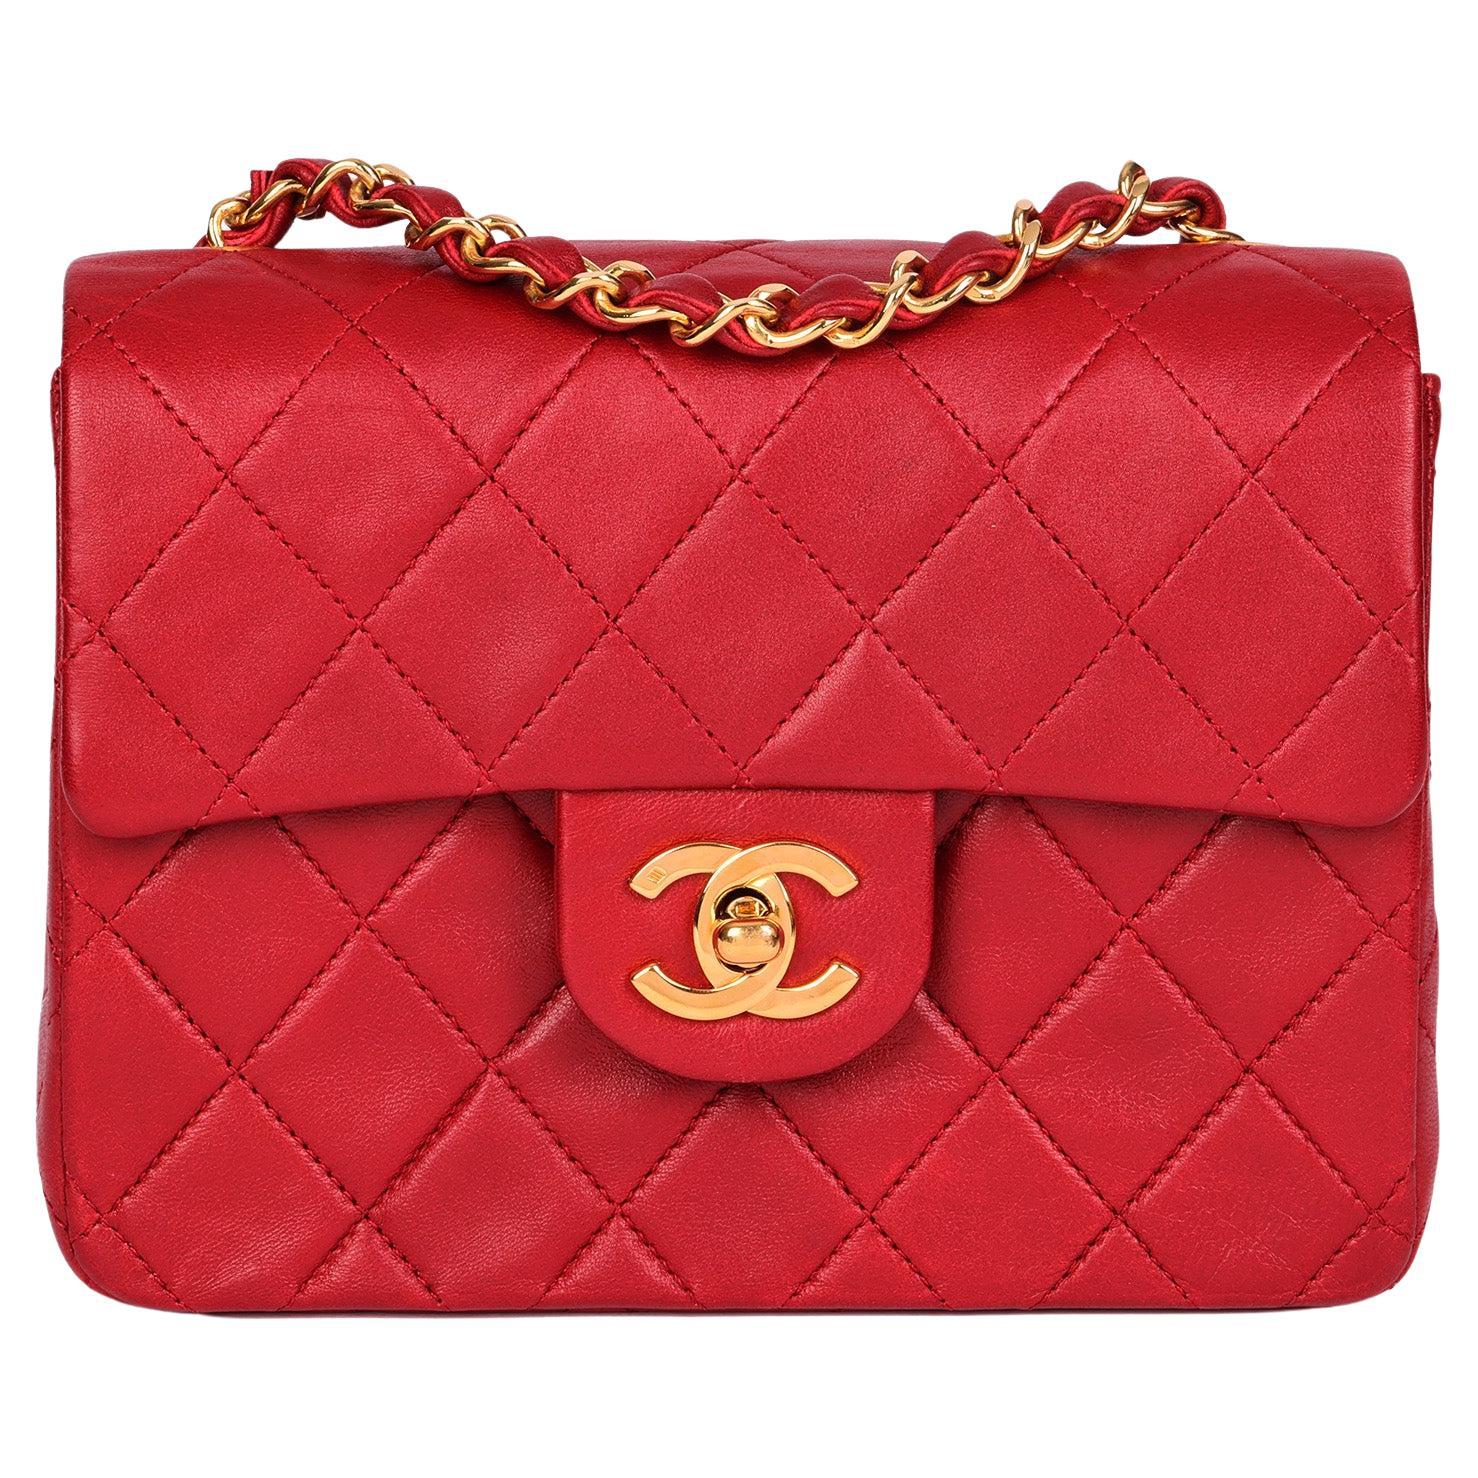 Chanel Pink Lambskin Chocolate Bar Quilted Camellia Bag